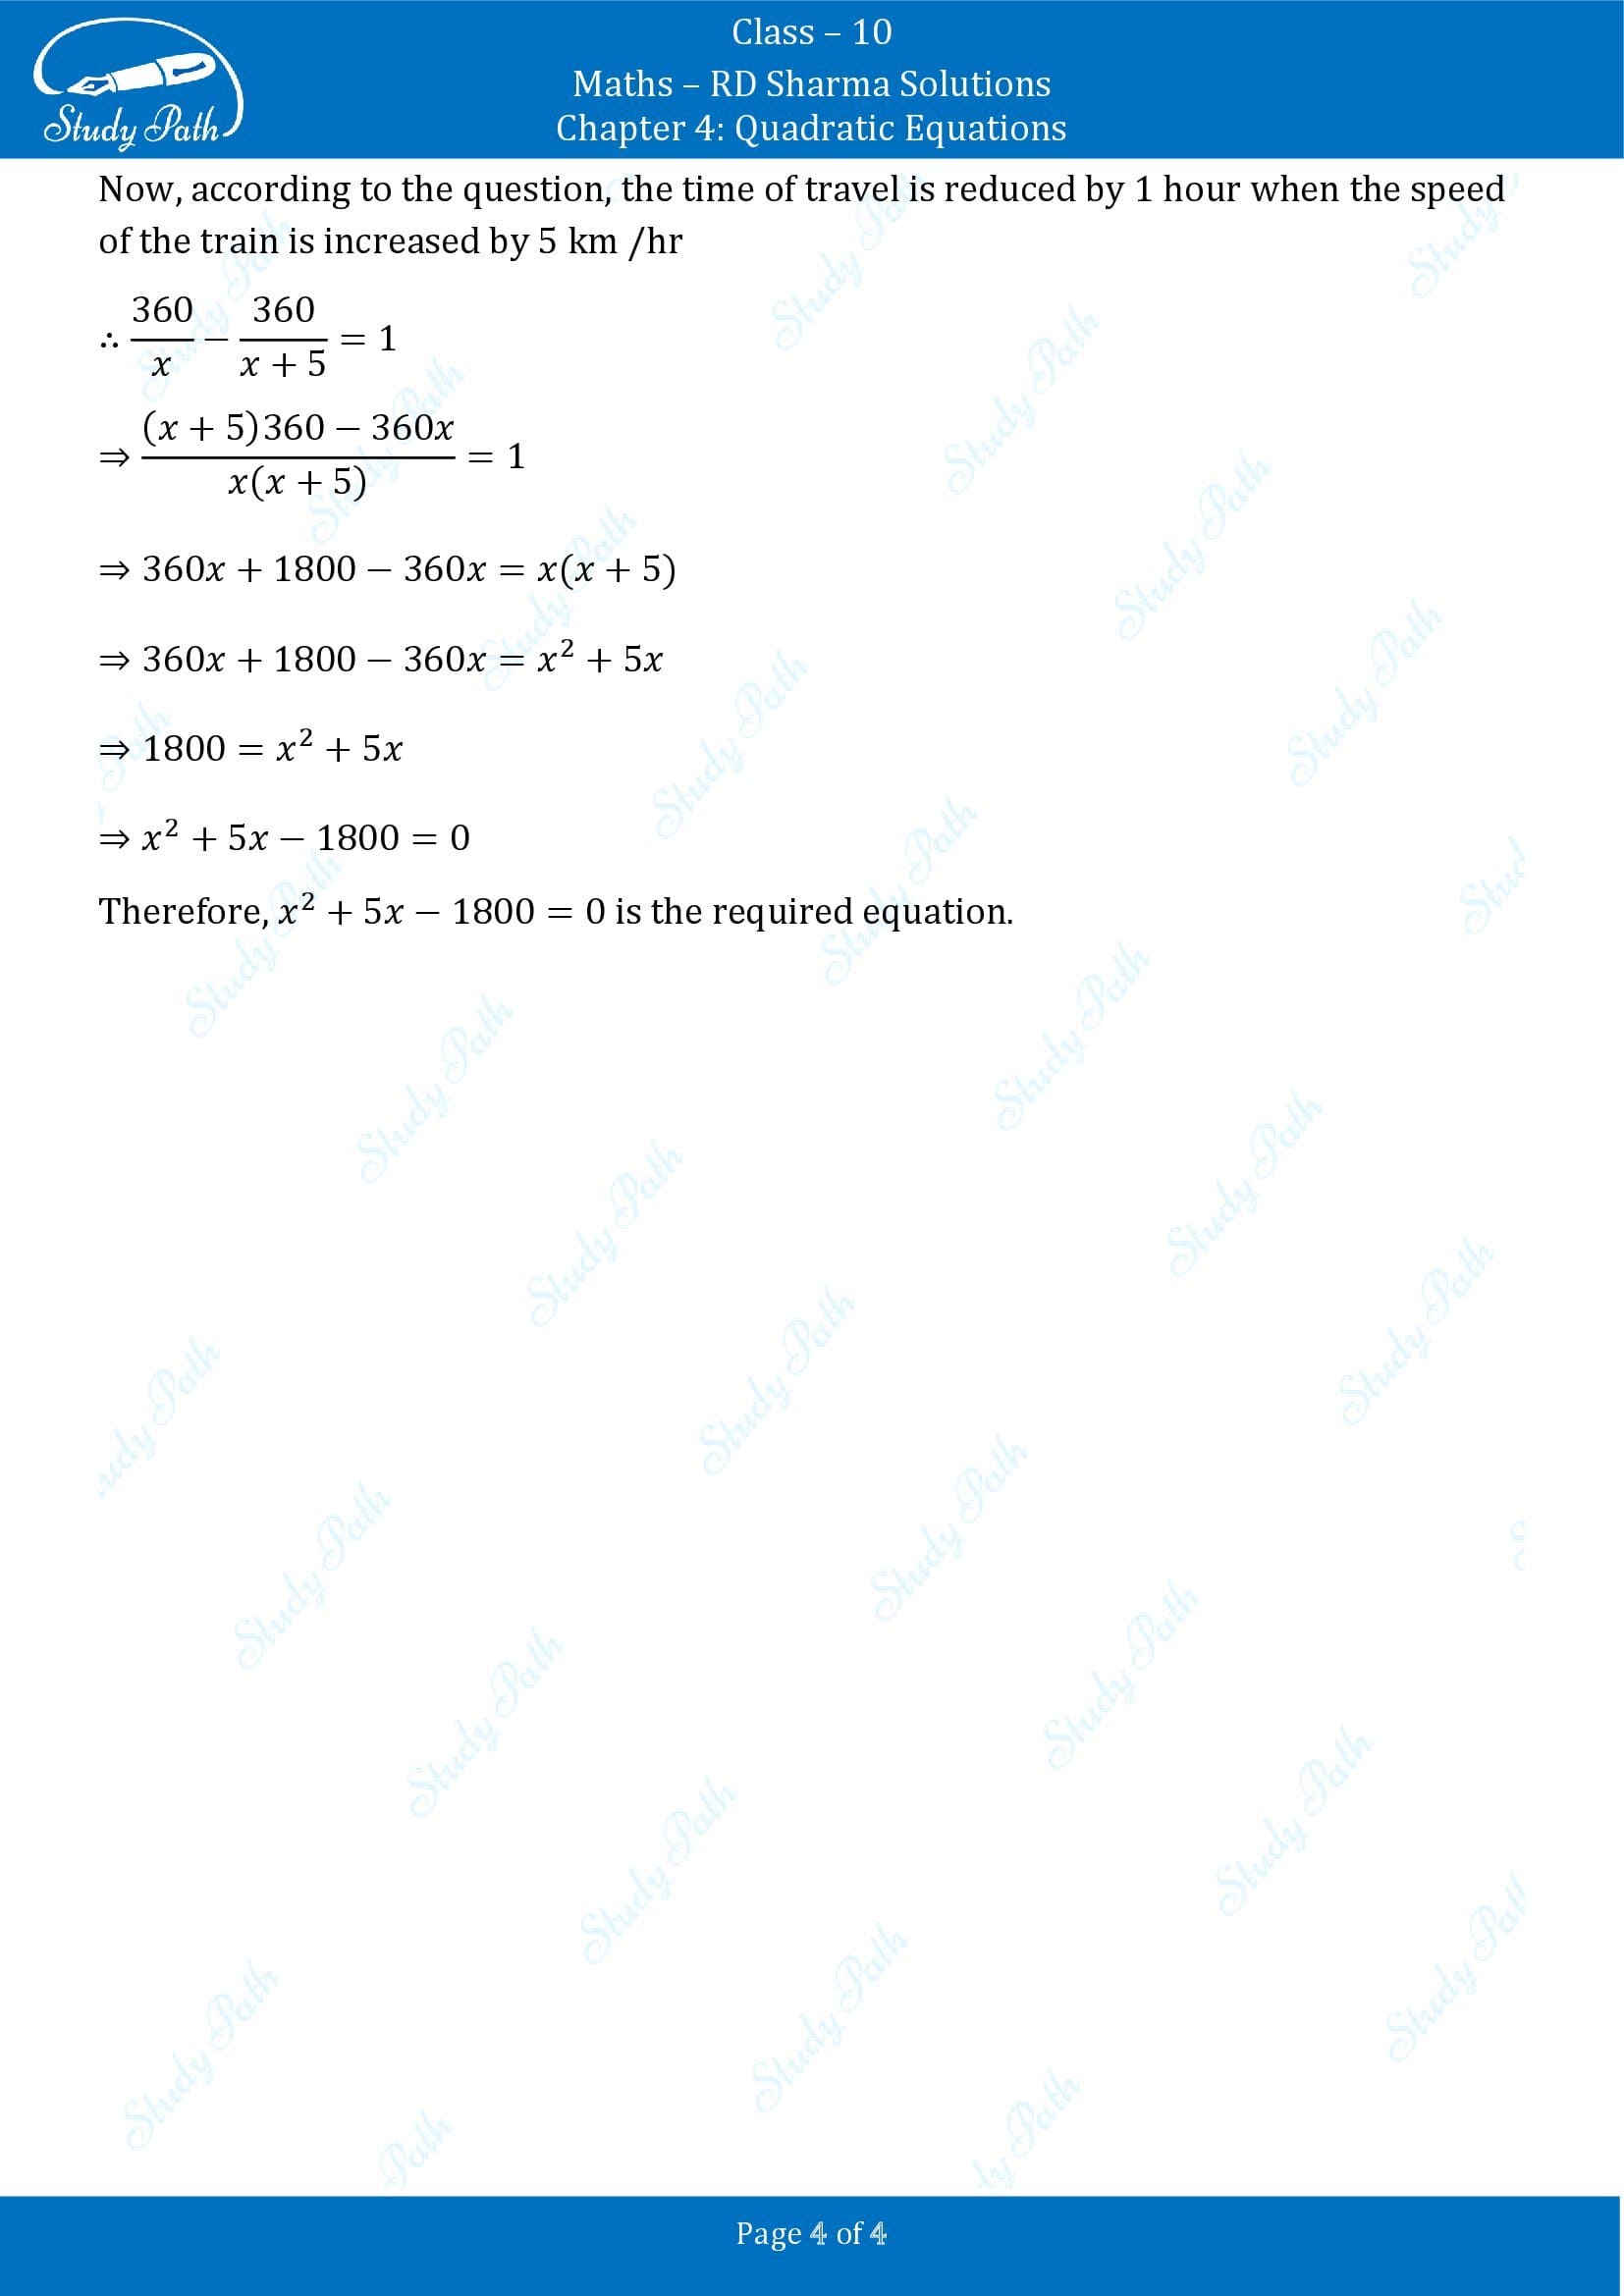 RD Sharma Solutions Class 10 Chapter 4 Quadratic Equations Exercise 4.2 0004